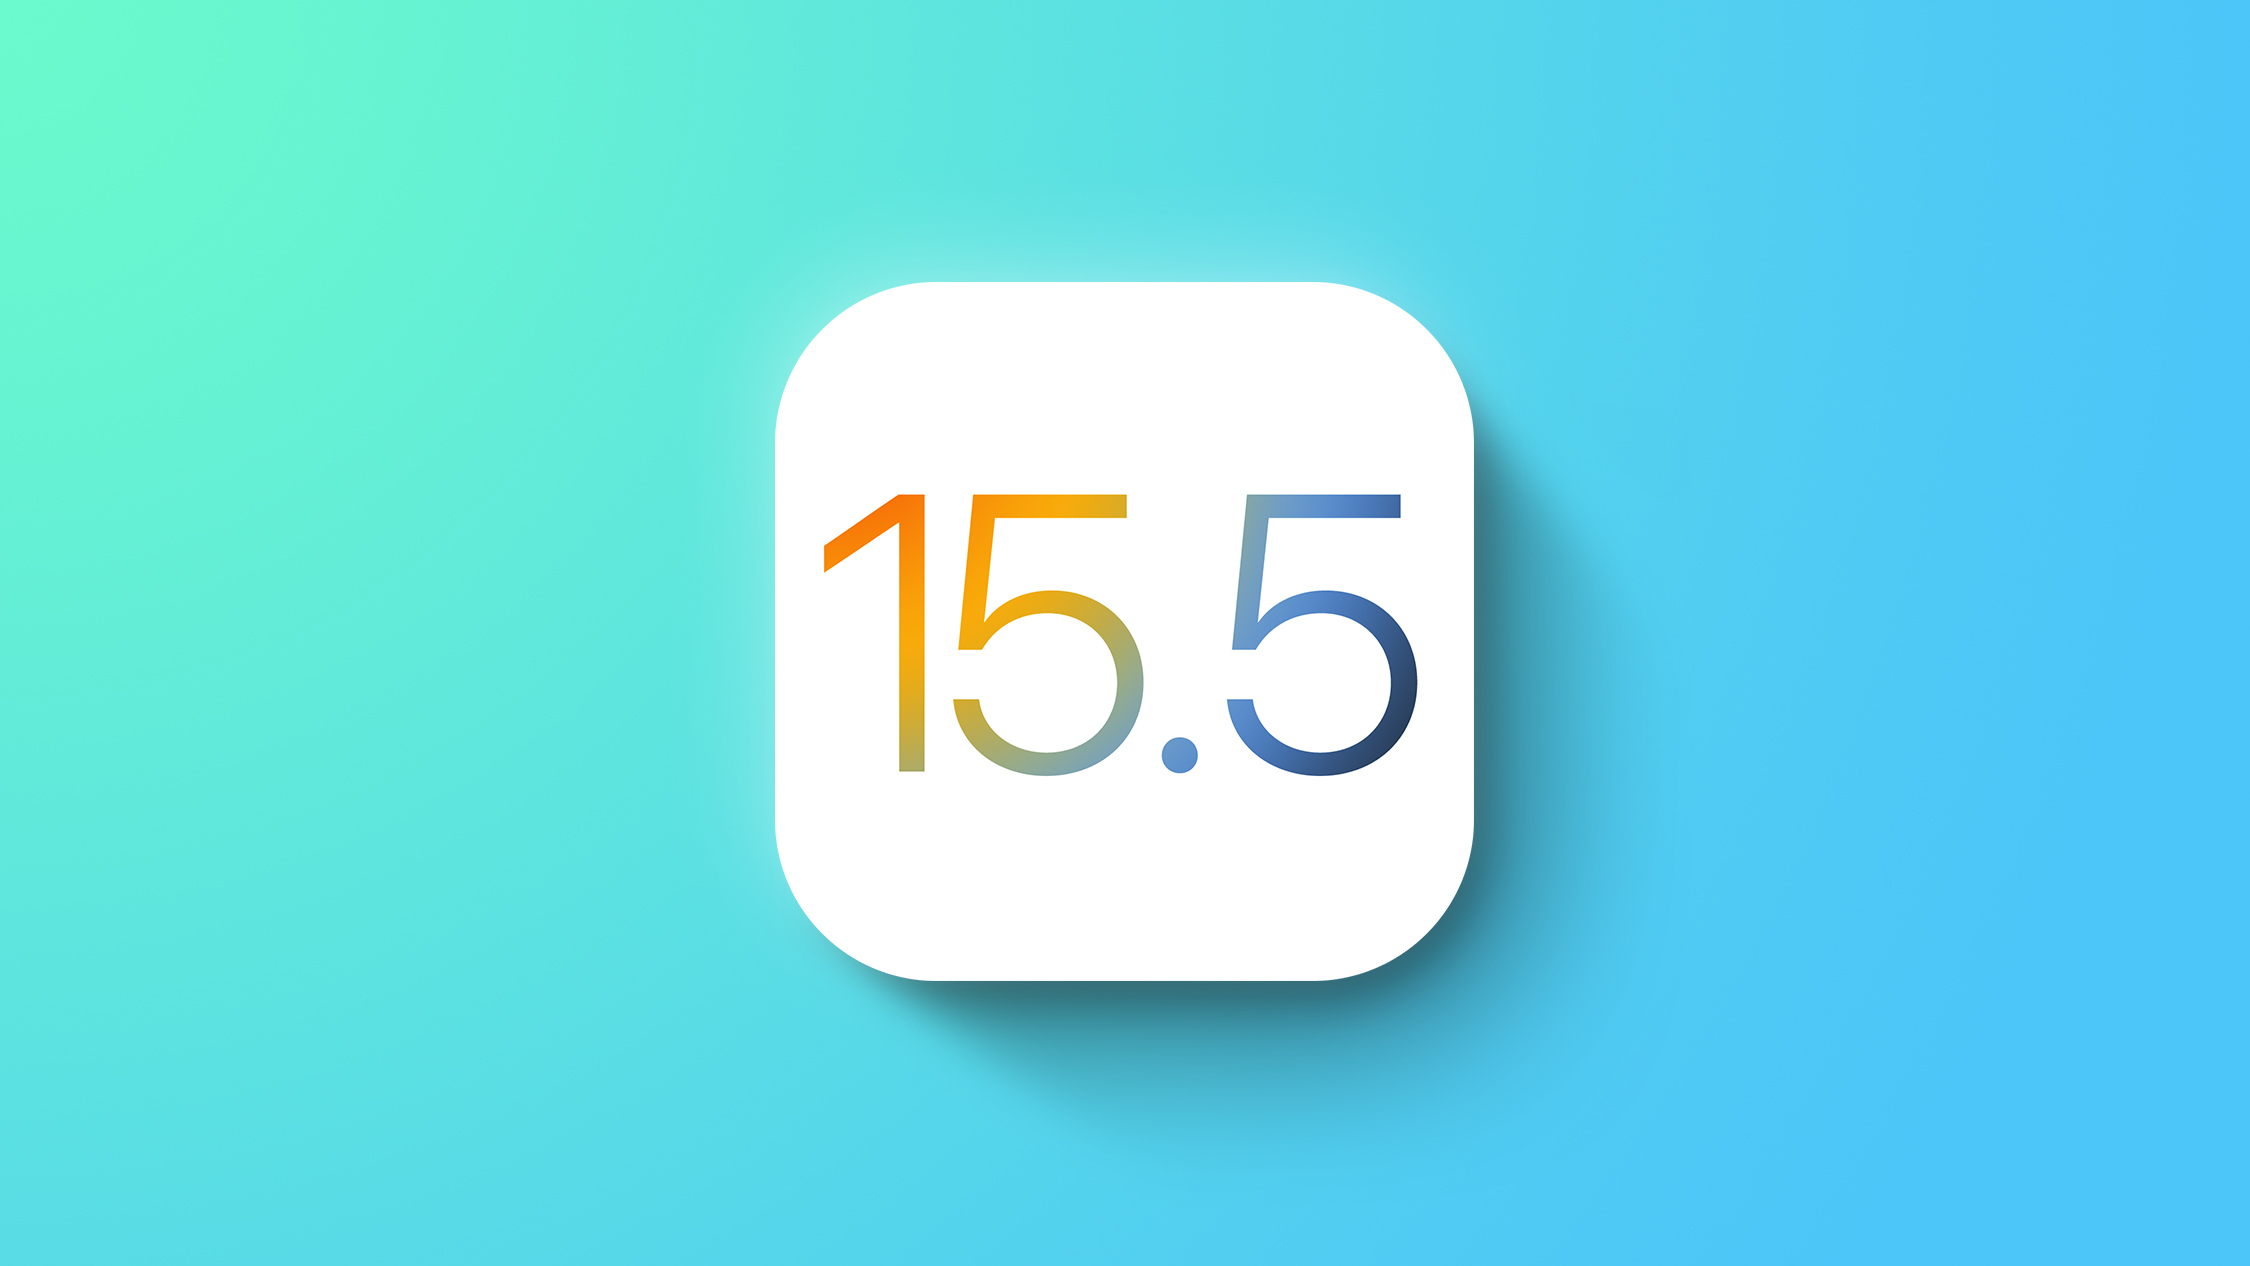 Apple Seeds iOS 15.5 and iPadOS 15.5 Release Candidates to Developers and Public Beta Testers